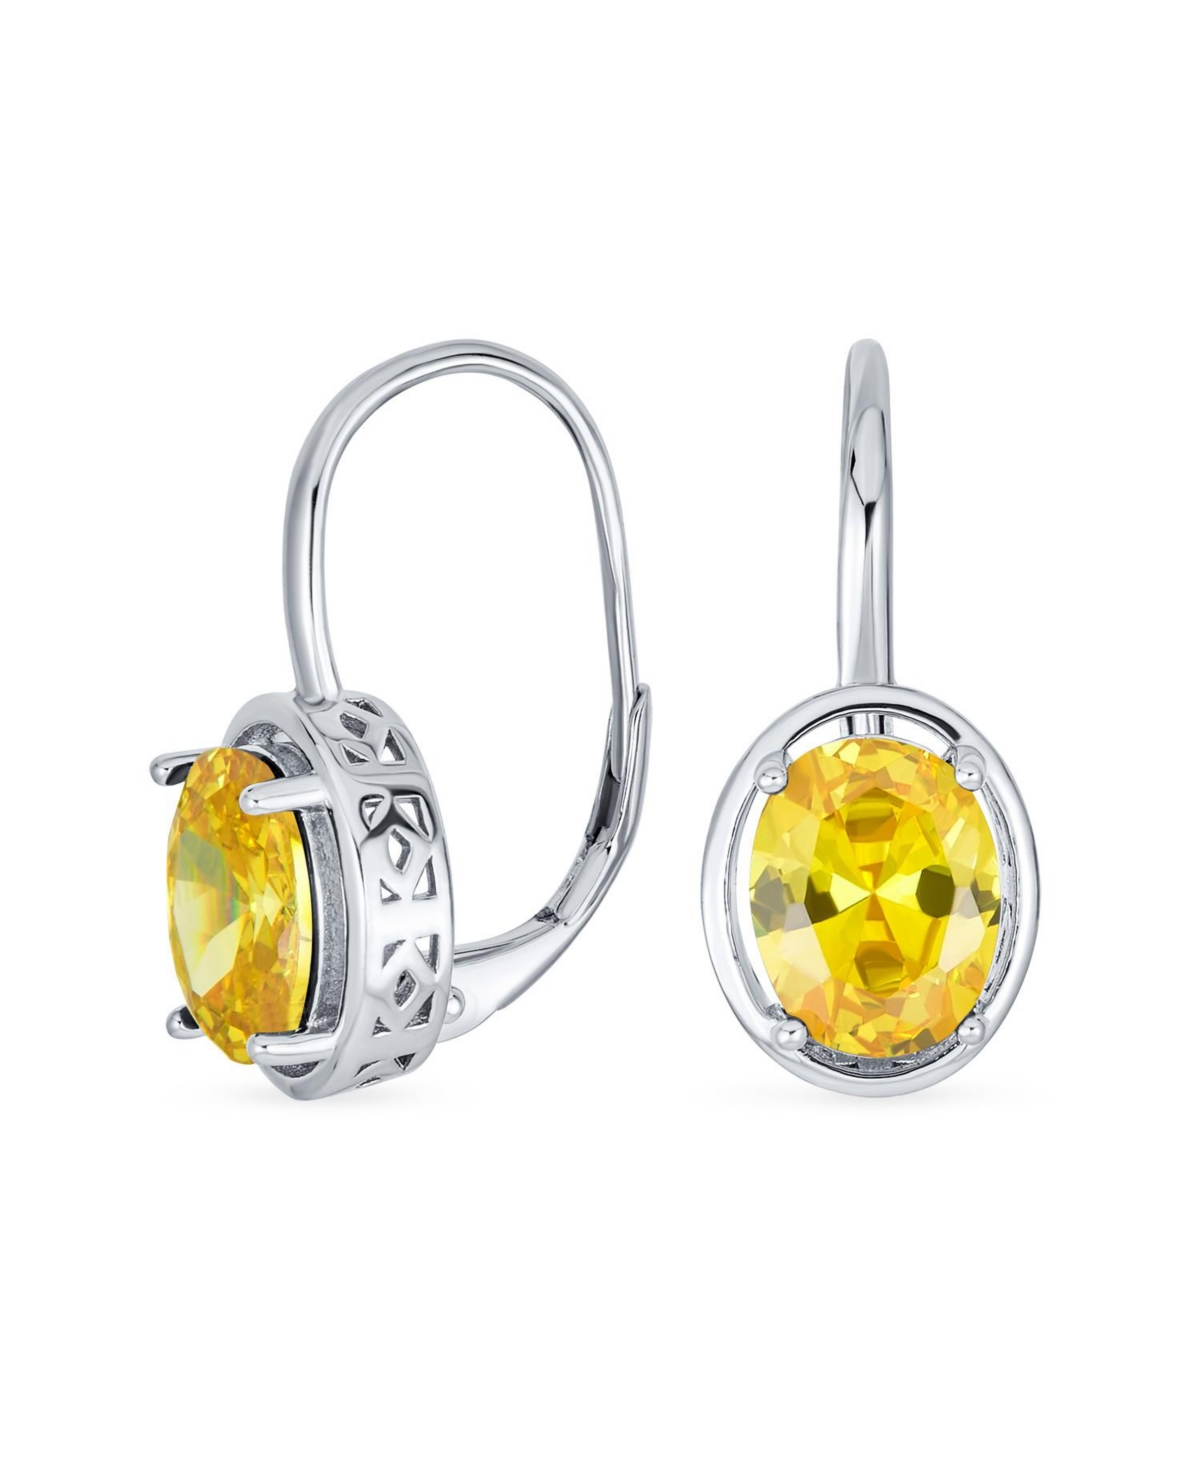 Aaa Cubic Zirconia Simulated Canary Yellow Birthstone 3.60 Ct. Oval 9X7MM Cz Sterling Silver Filigree Style Dangle Drop Earrings For Wom